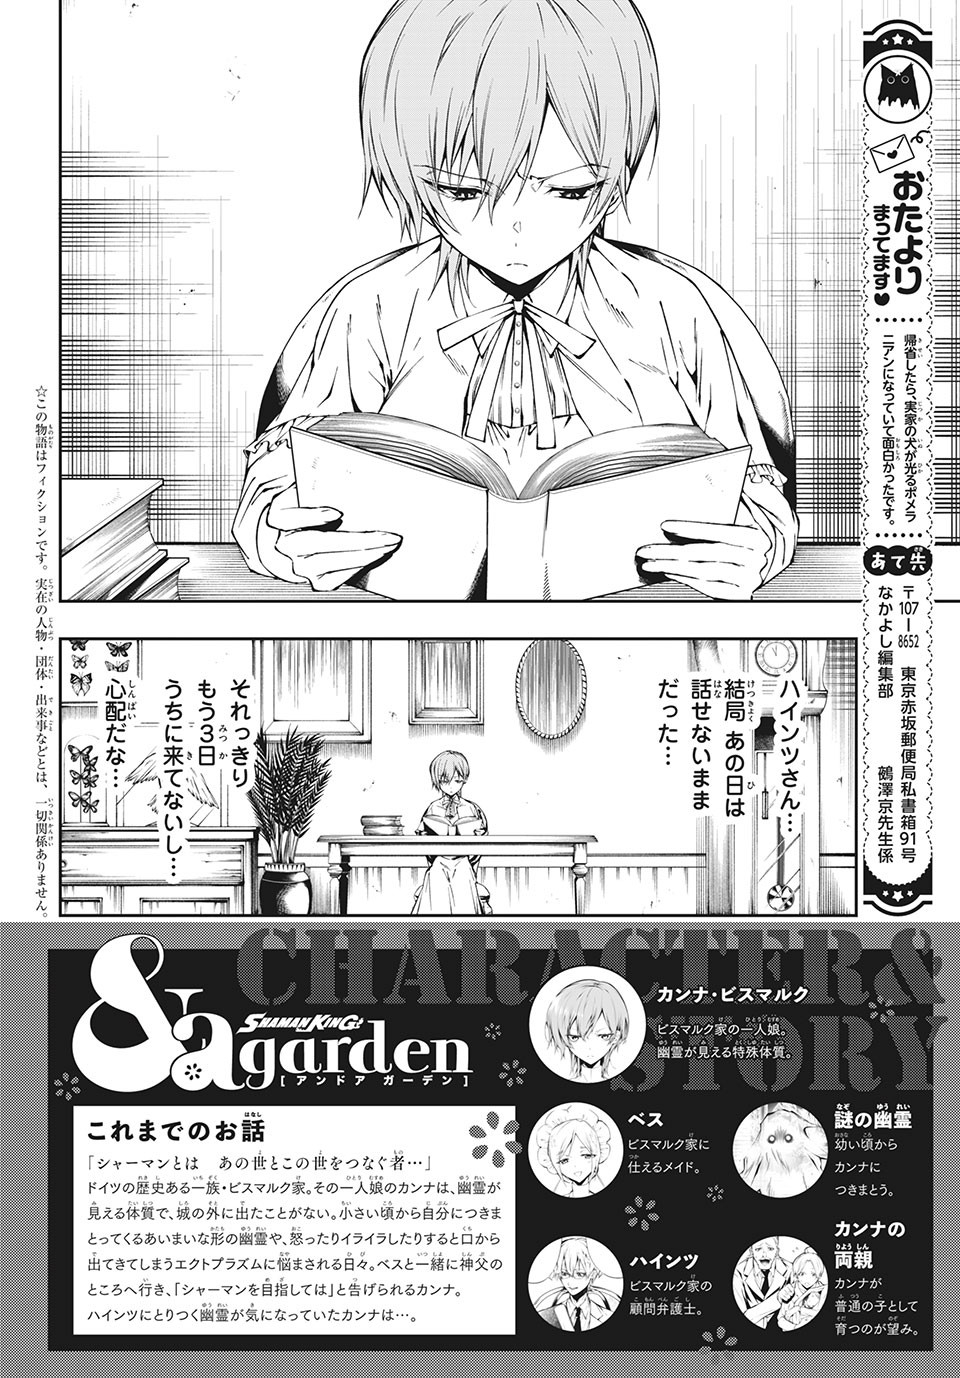 Shaman King: and a garden 第3.1話 - Page 2